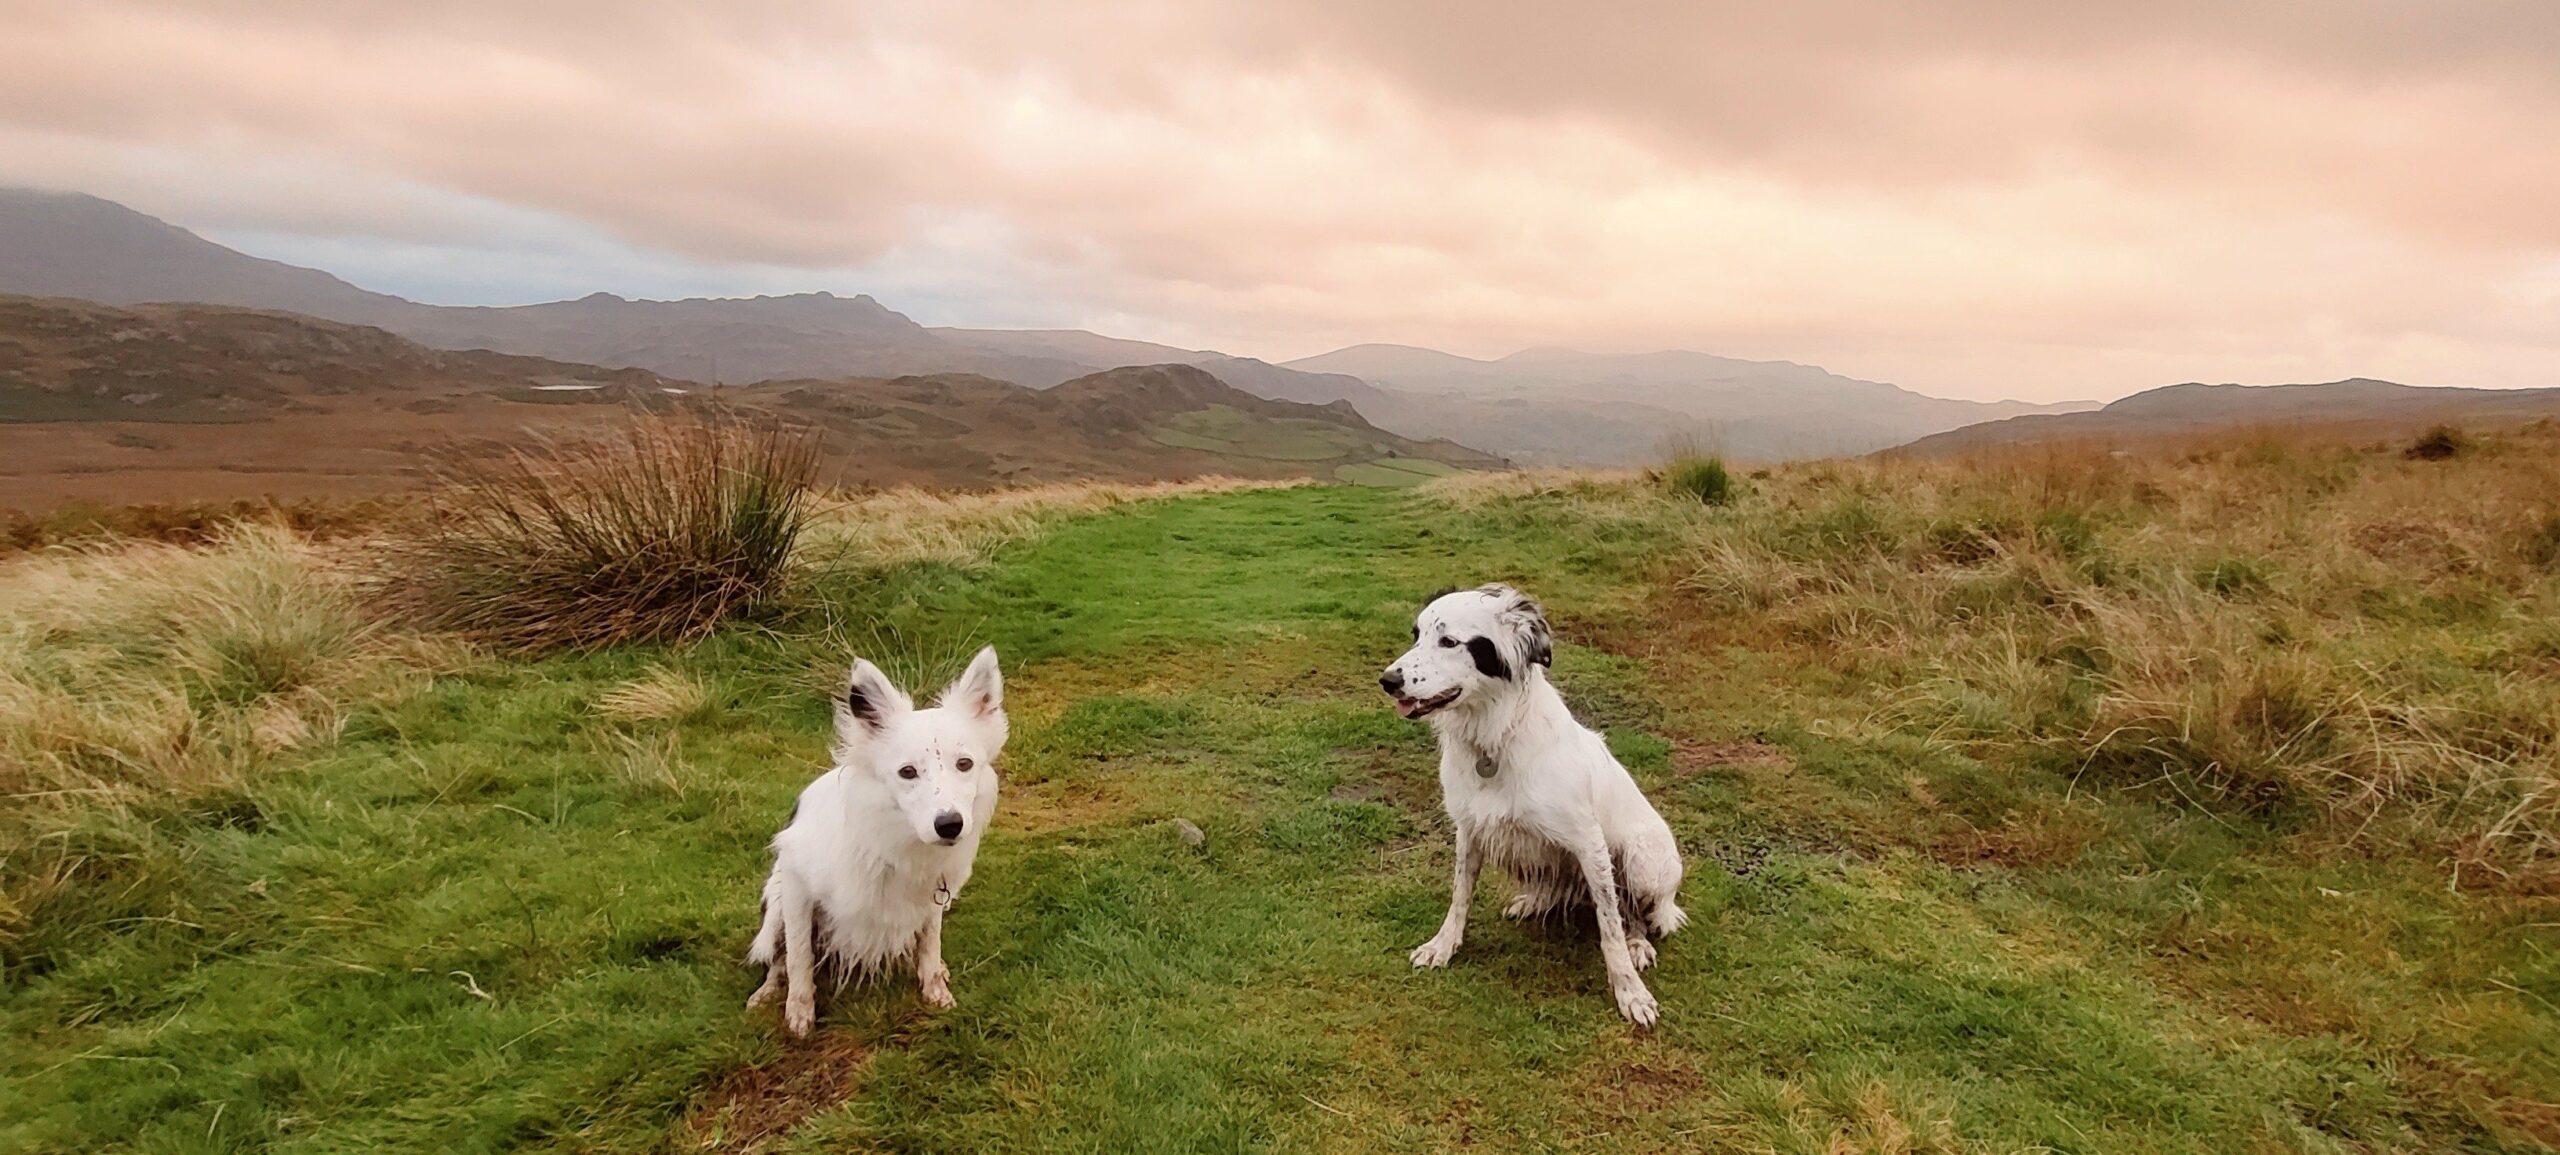 dogs on a mountain